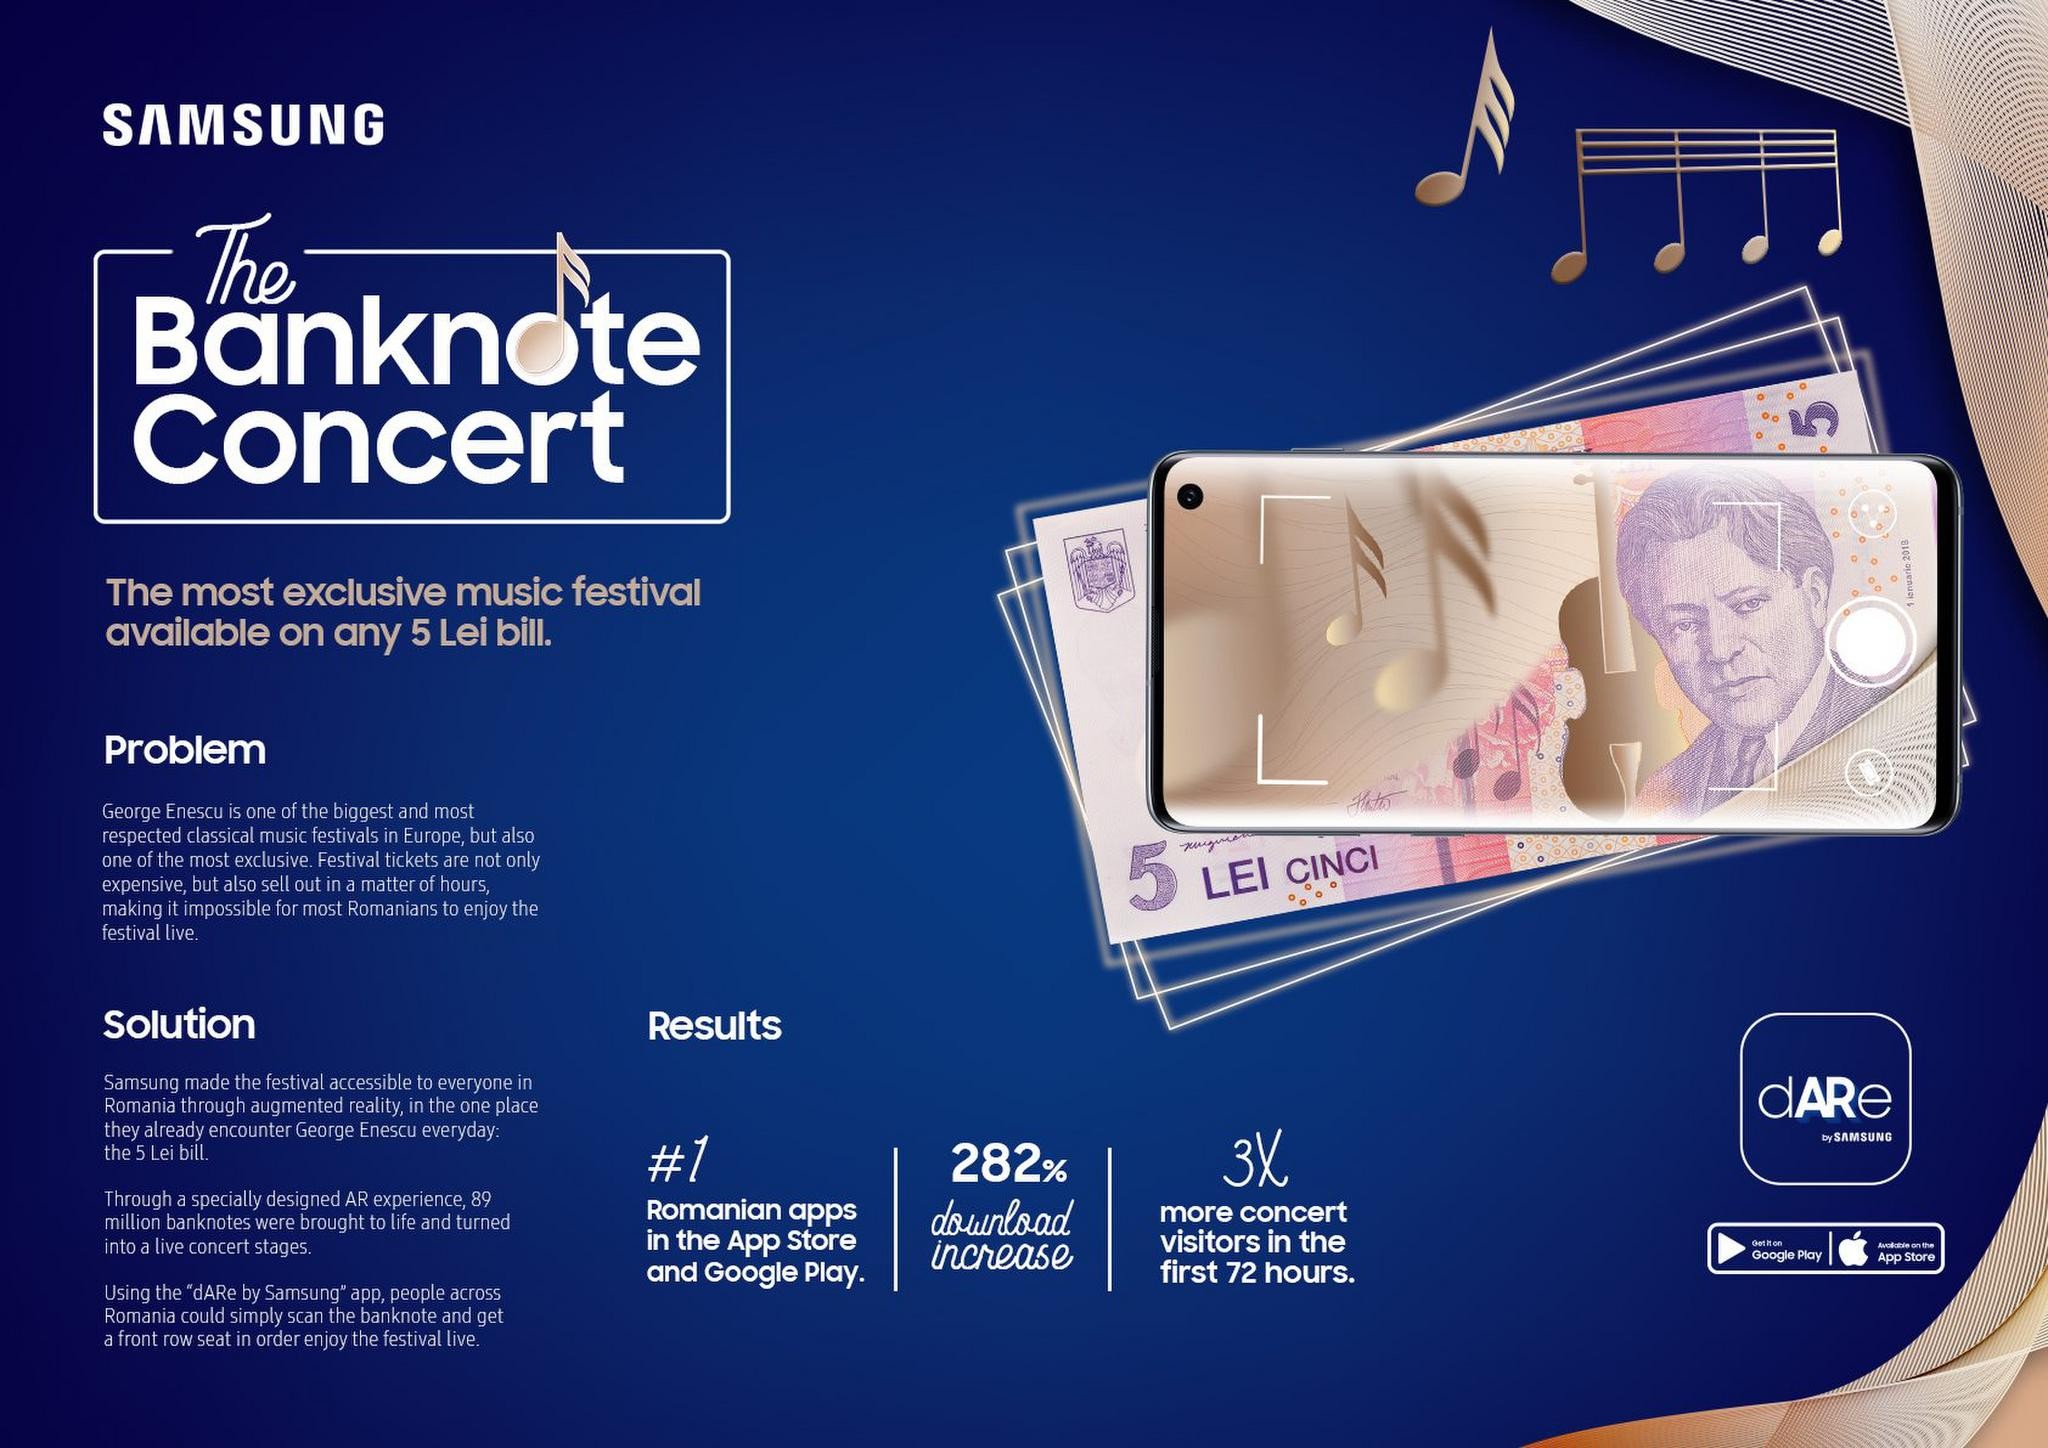 The Banknote Concerts